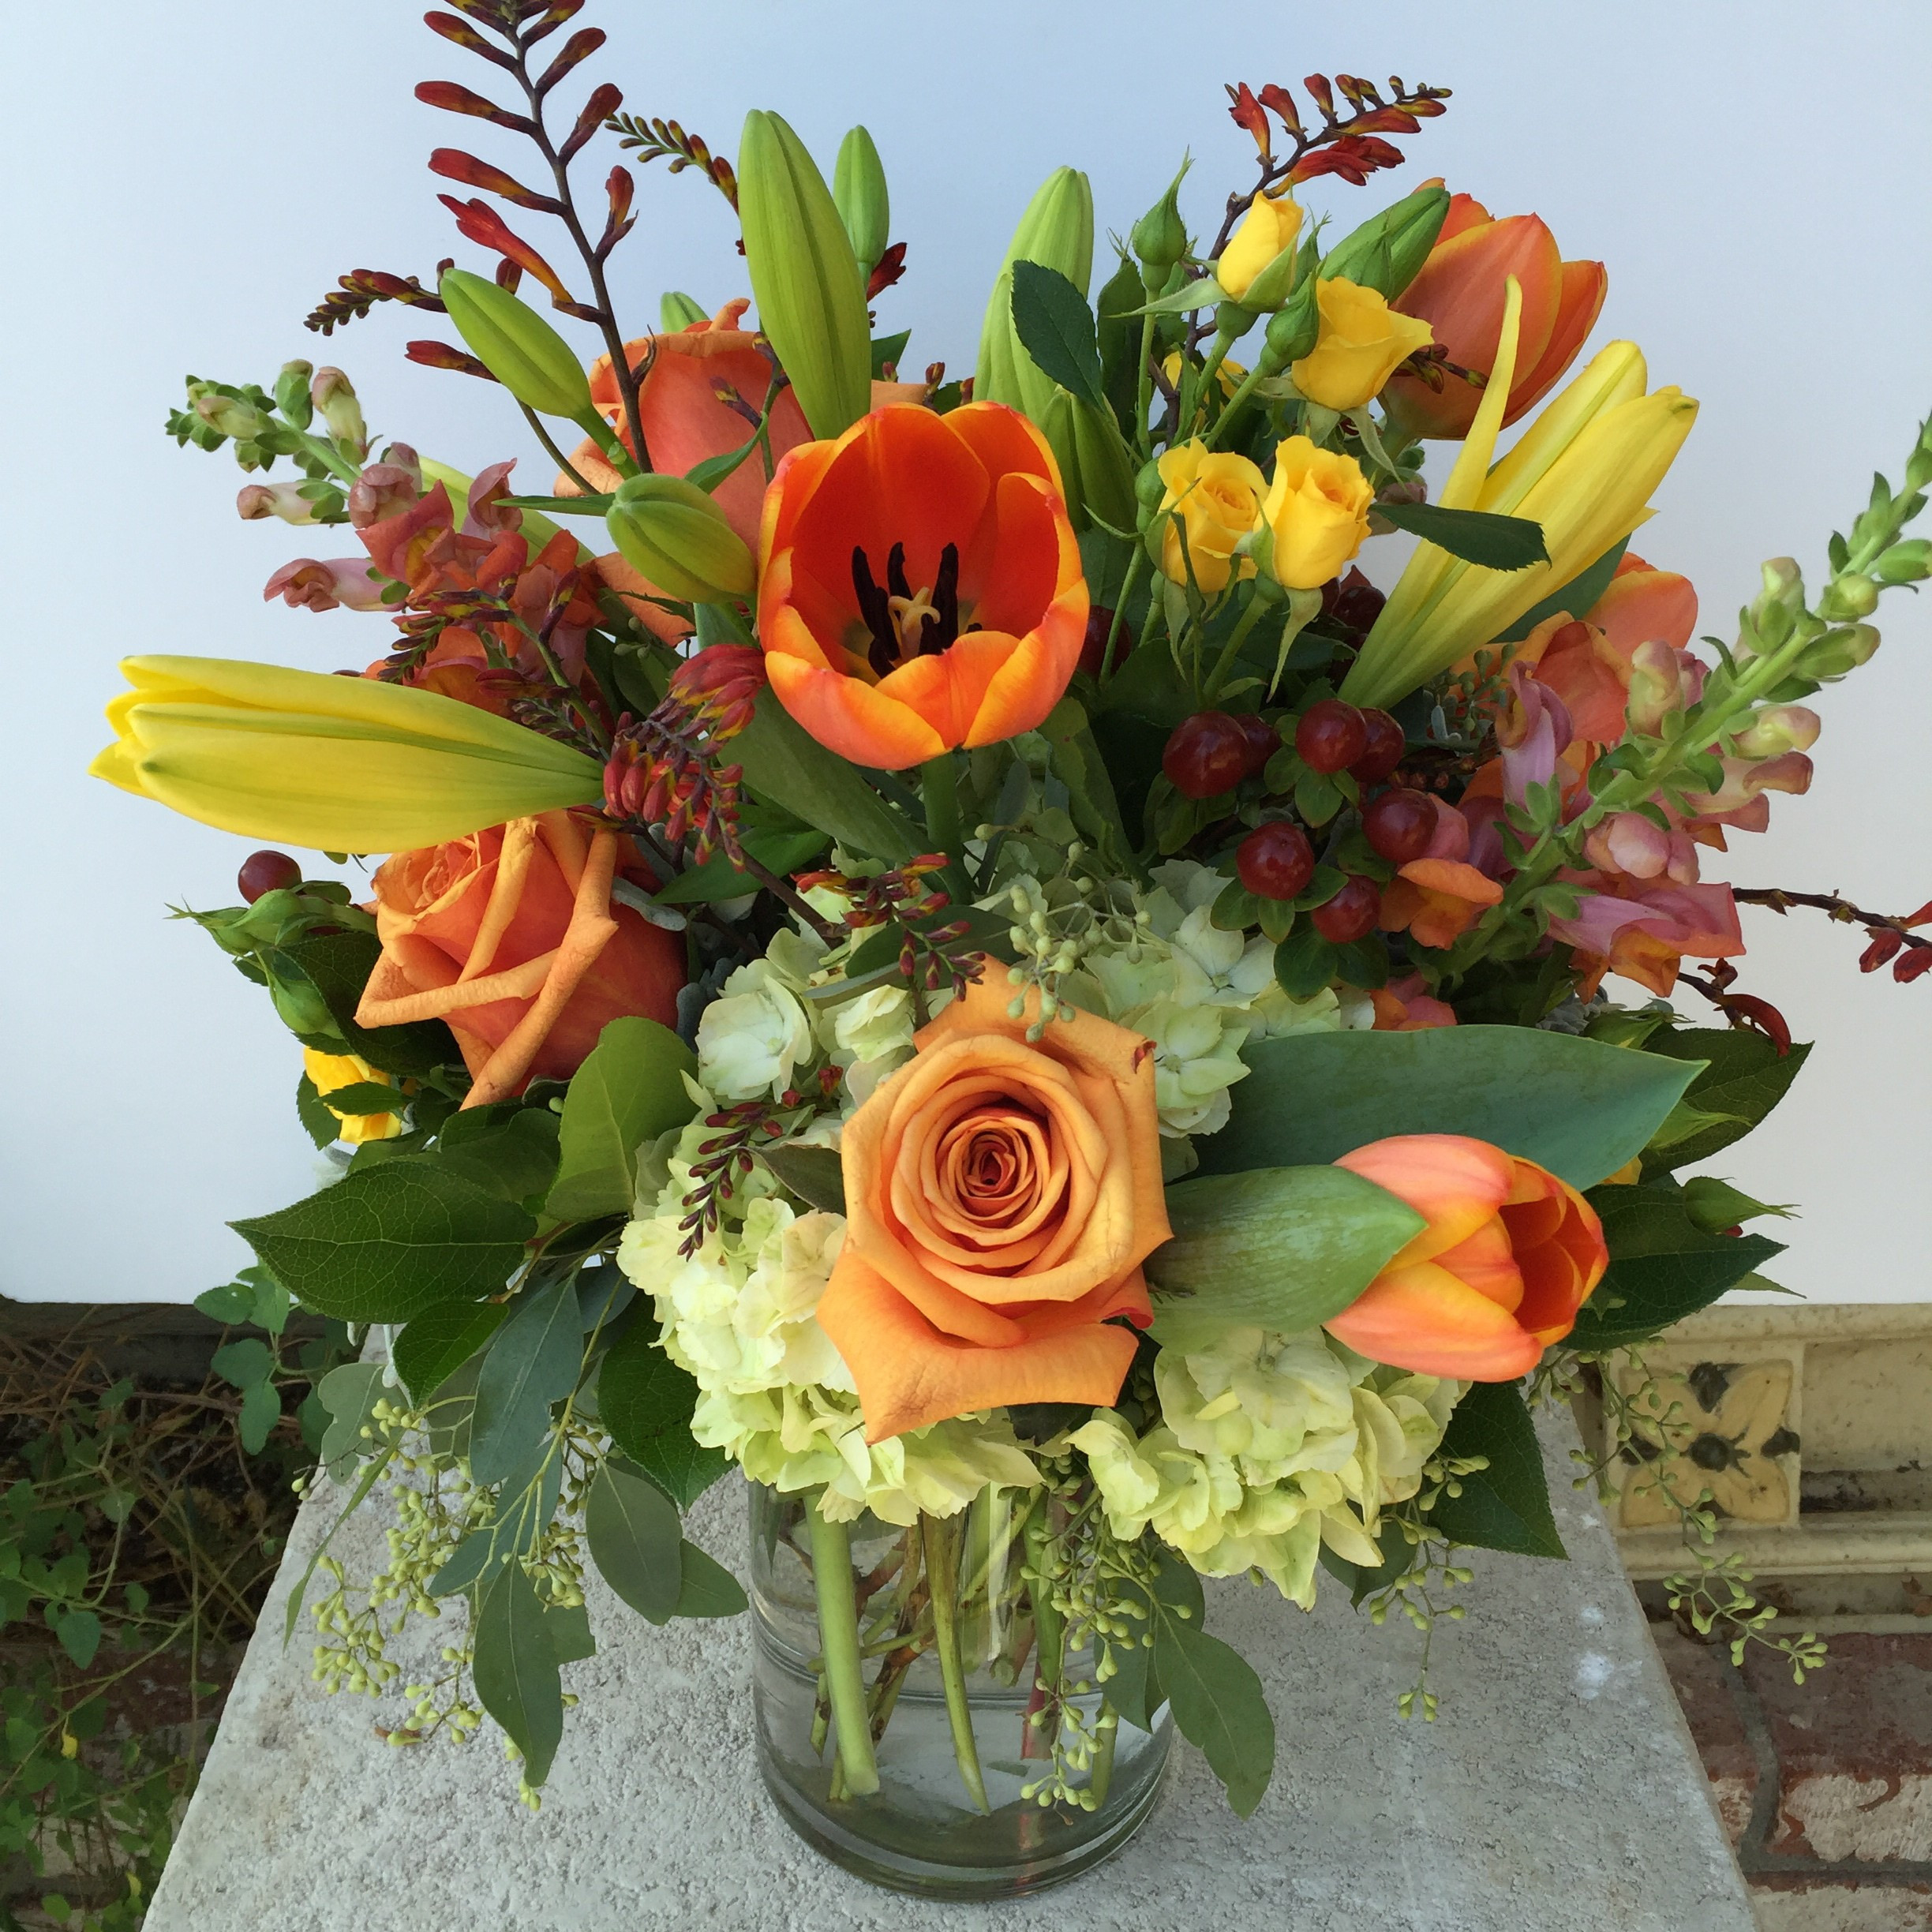 26 Ideal Proflowers Free Vase Code 2024 free download proflowers free vase code of full of fall in concord ca full bloom throughout full of fall a tall wide vase of seasonal fall flowers in bright fall tones